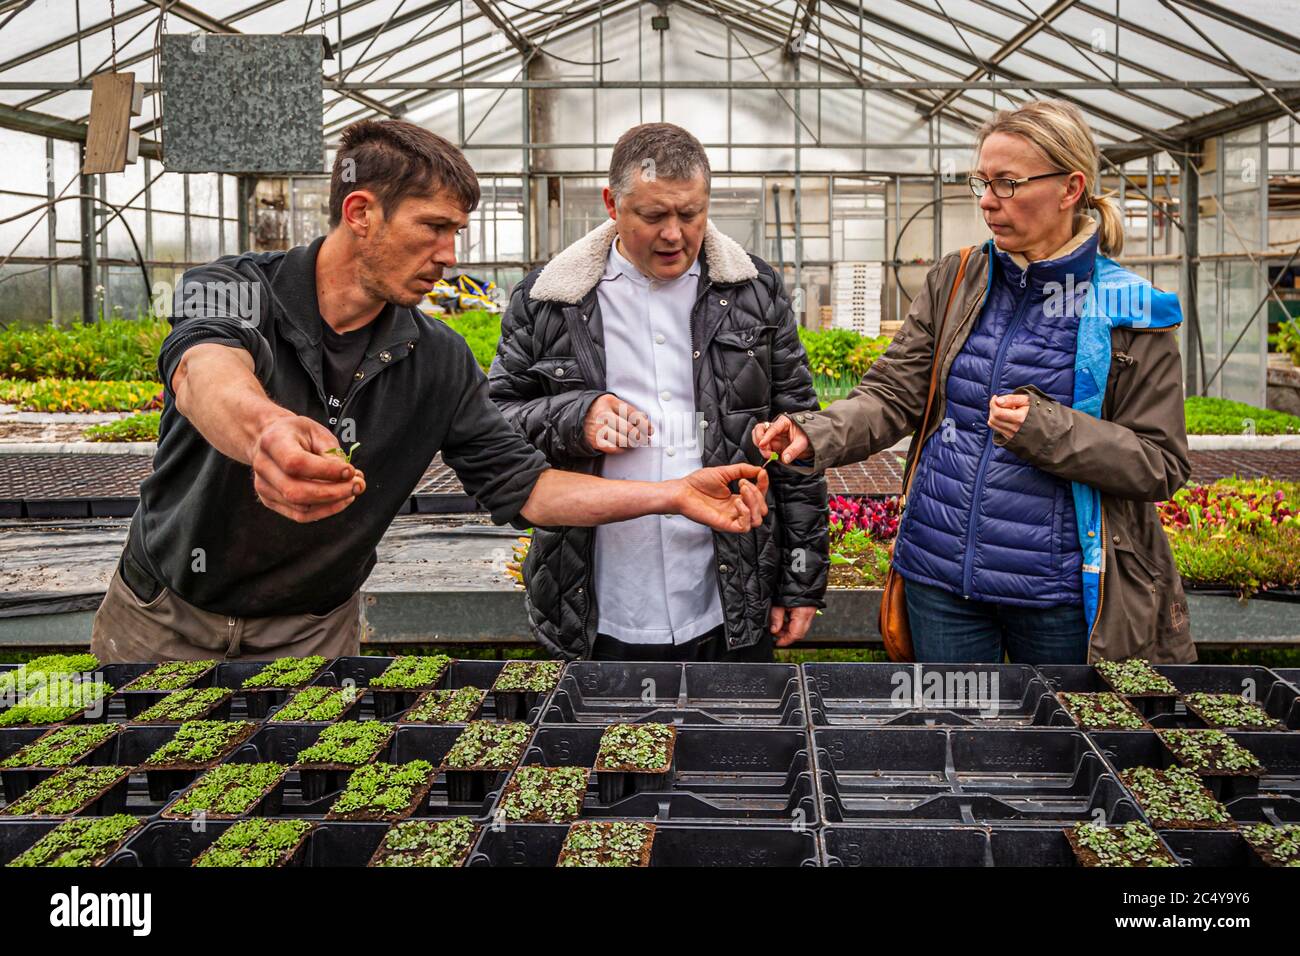 Patrice Mallegol invites Loïc Le Bail and Angela Berg to a herb tasting. Food Tour with Michelin Star Chef Loic Le Bail in Morlaix, France Stock Photo